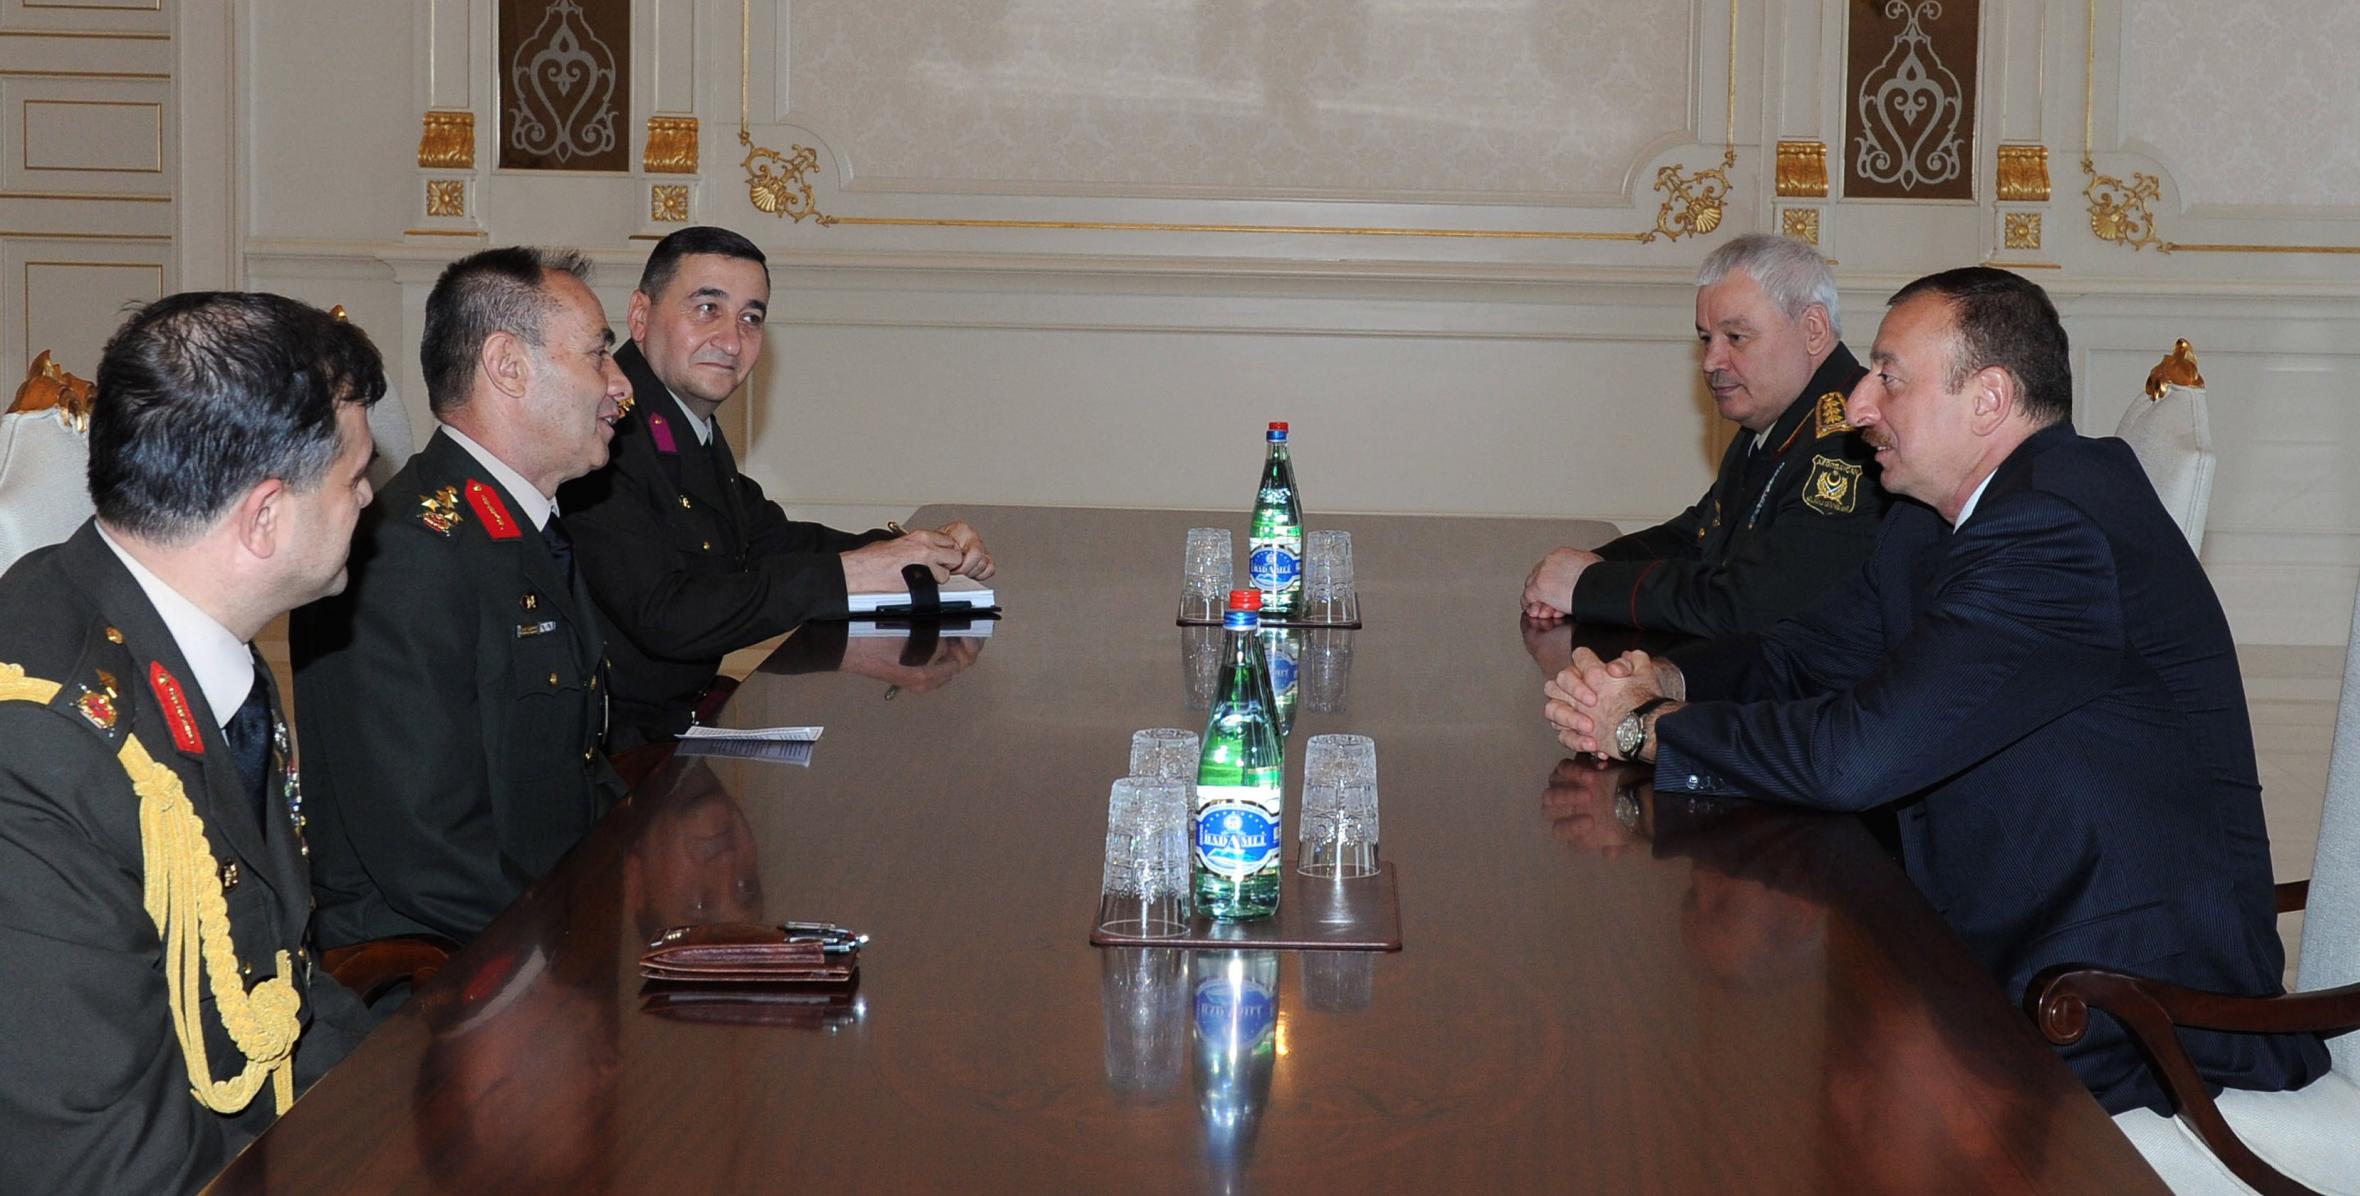 Ilham Aliyev received the delegation led by Saldiray Berk, the Commander of Land Forces’ Training and Doctrine of Turkey